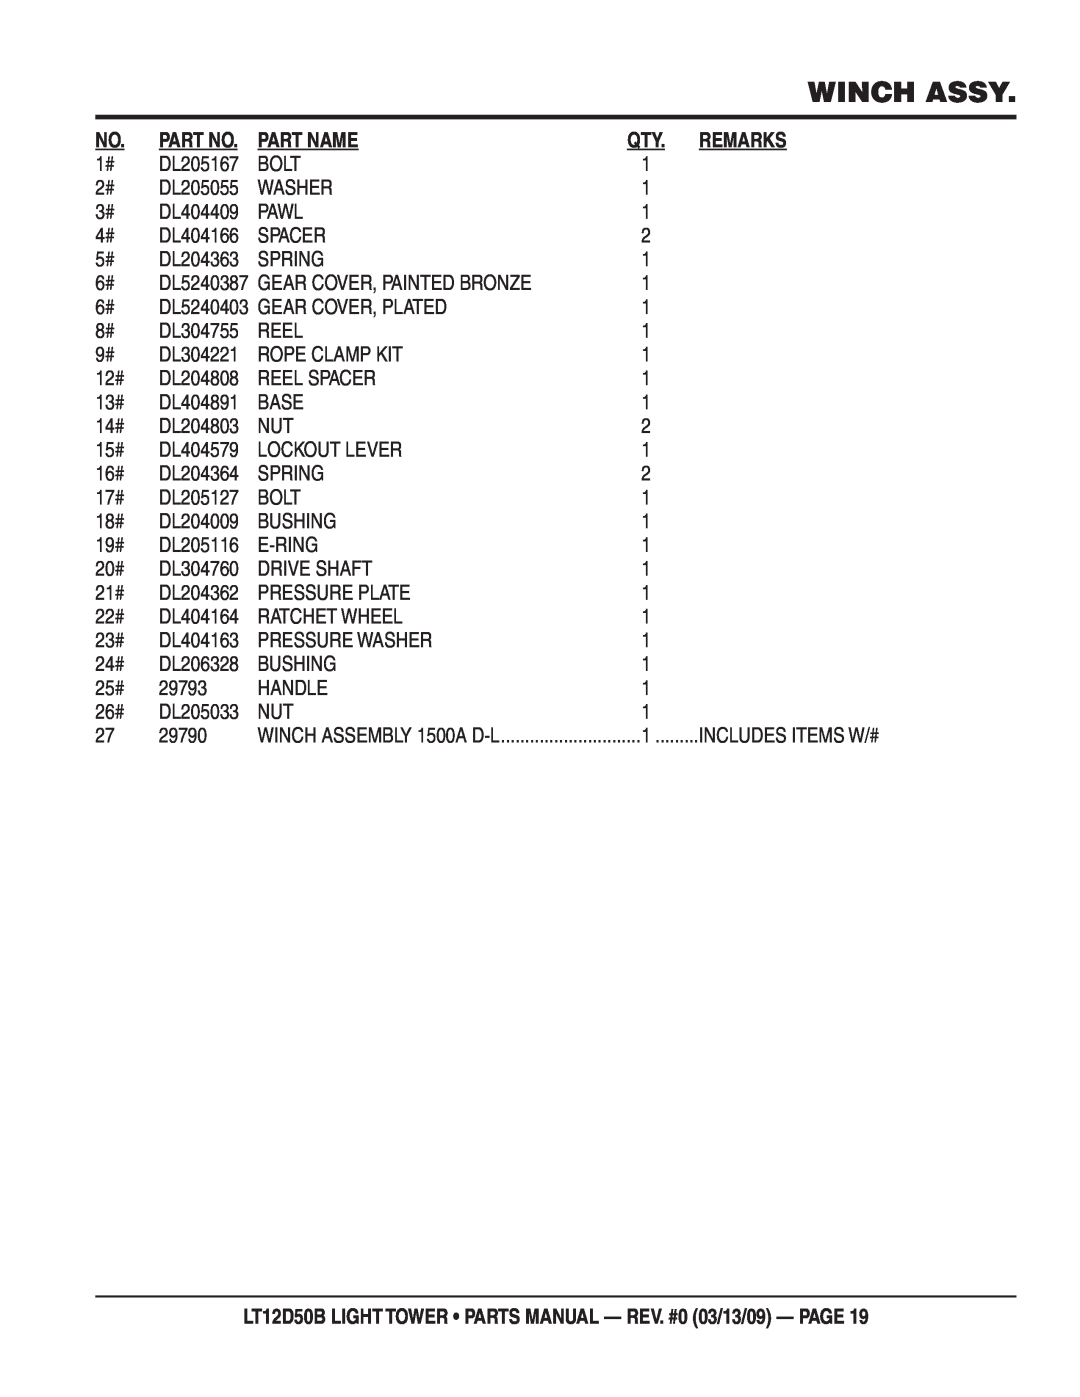 Multiquip Winch Assy, Part Name, Qty. Remarks, LT12D50B LIGHT TOWER PARTS MANUAL - REV. #0 03/13/09 - PAGE, DL5240387 